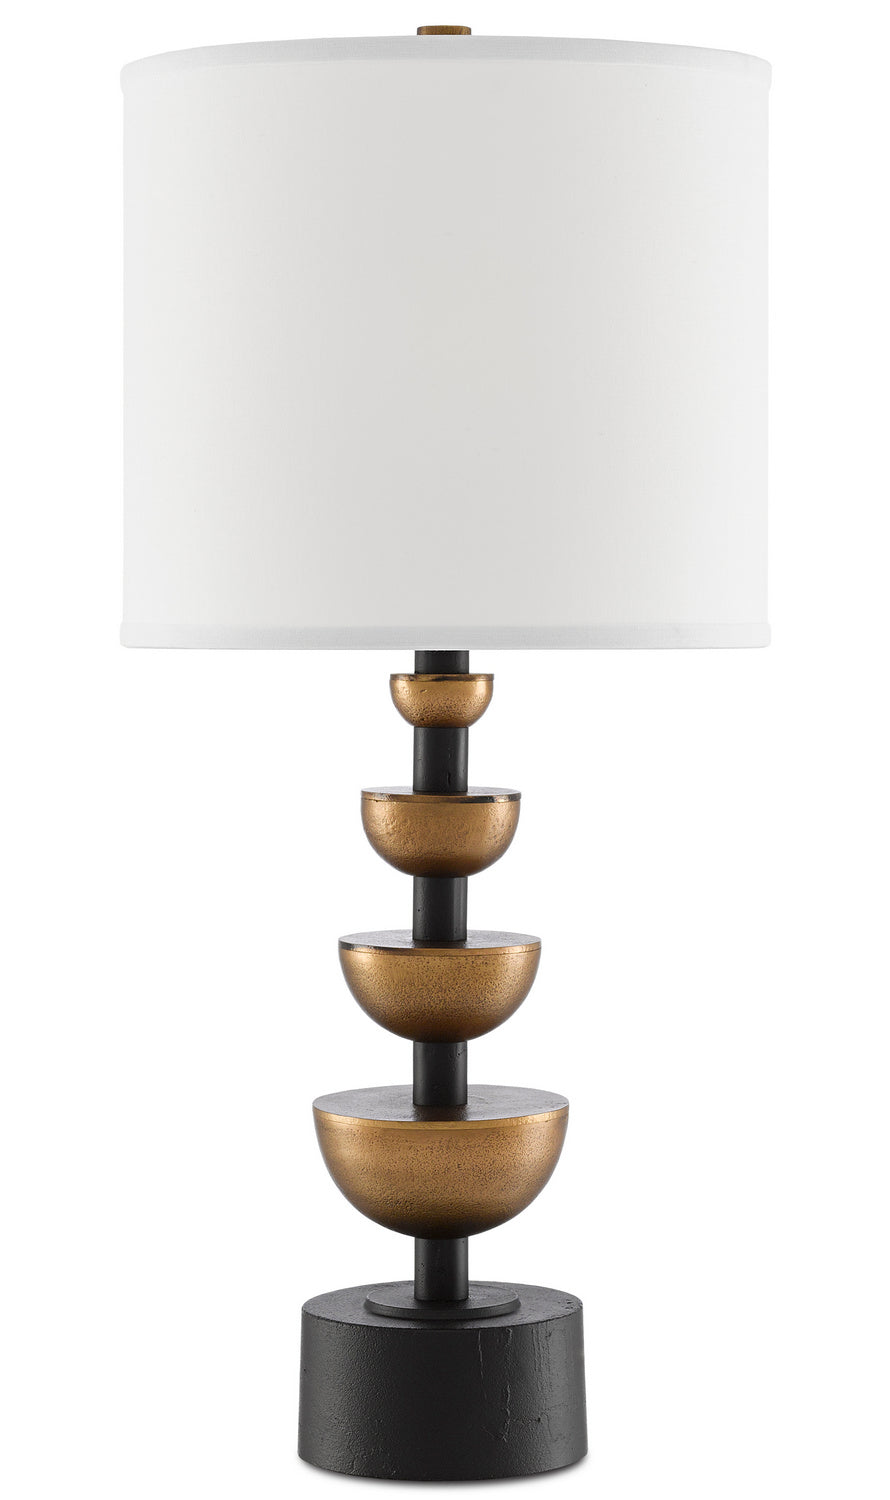 One Light Table Lamp from the Chastain collection in Antique Brass/Black finish